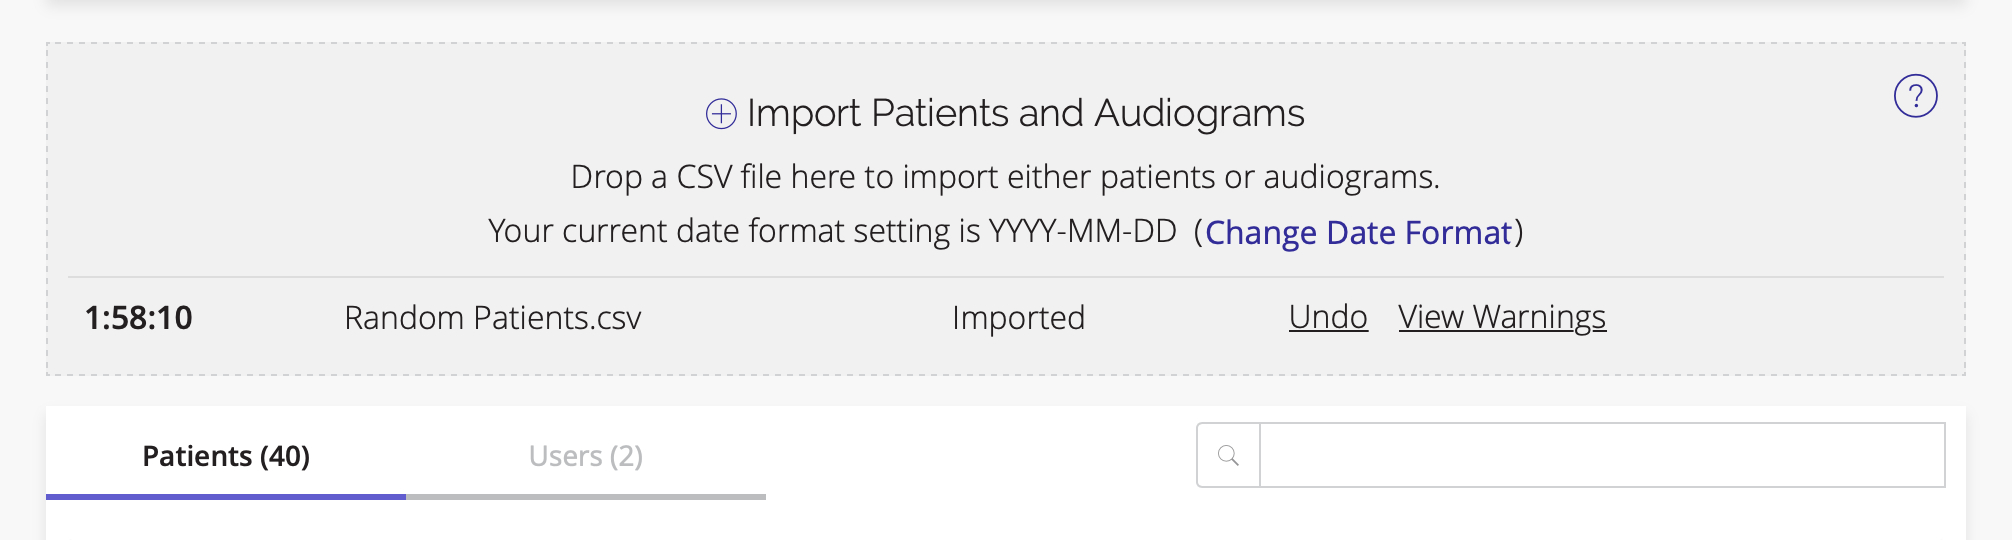 Patient & Audiogram Import Instructions With Blank Audiogram Template Download